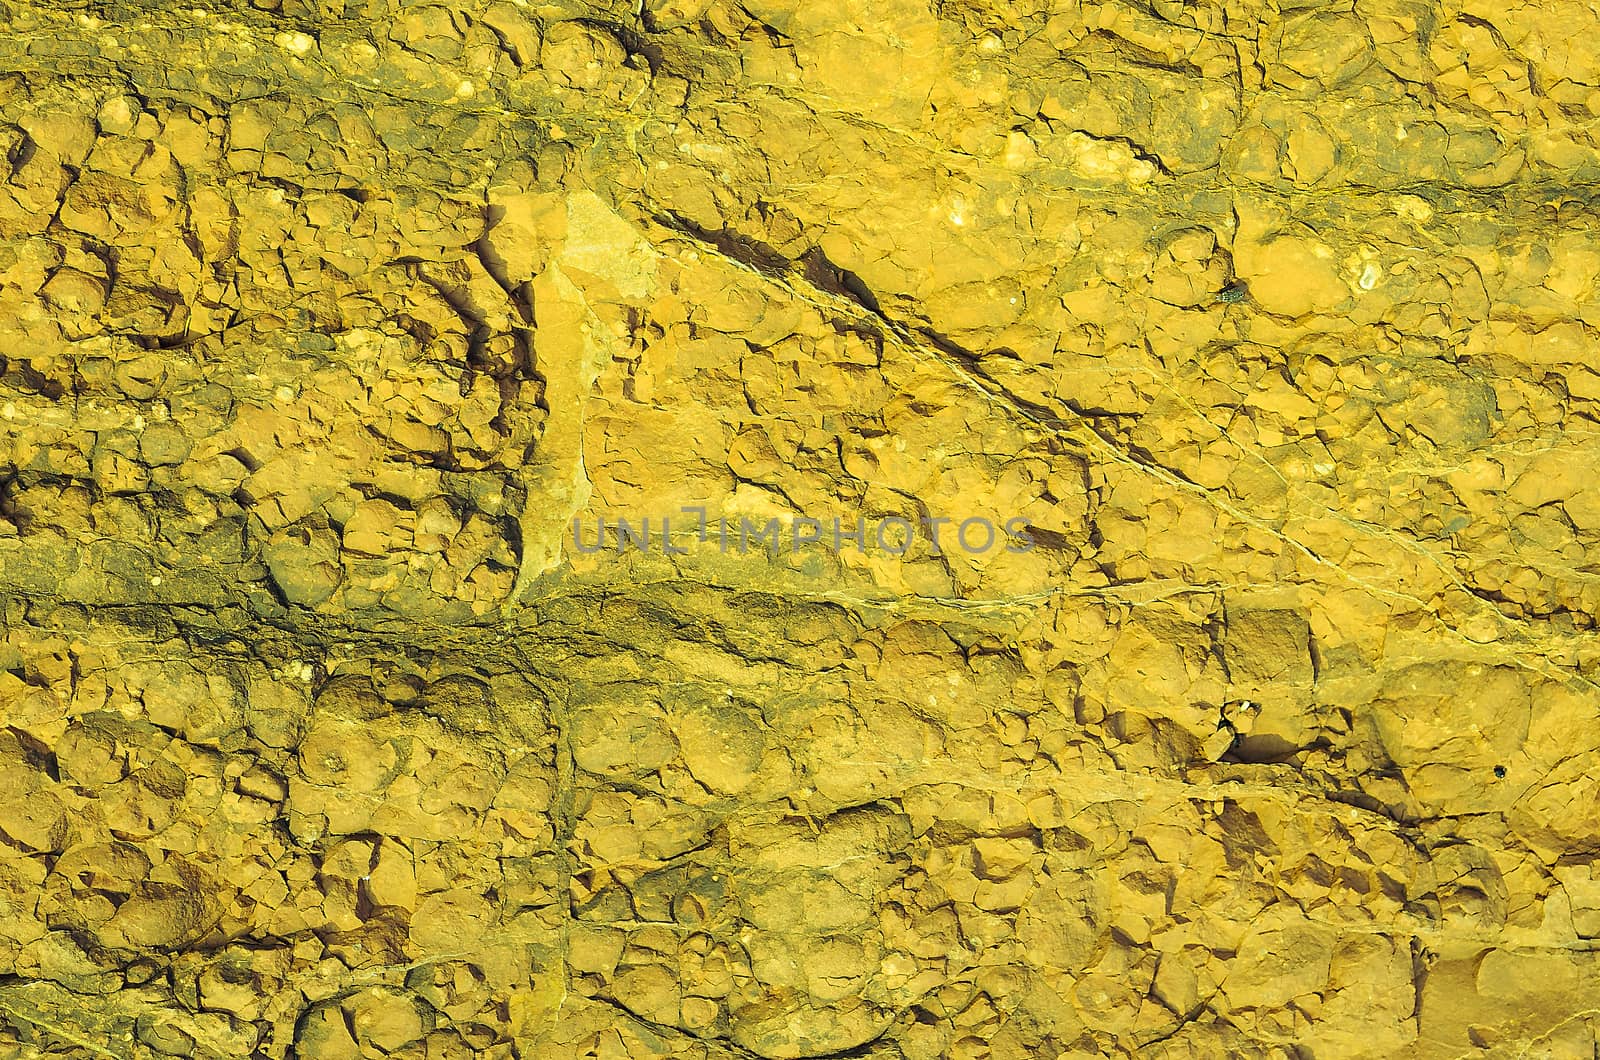 The rock in yellow face texture.